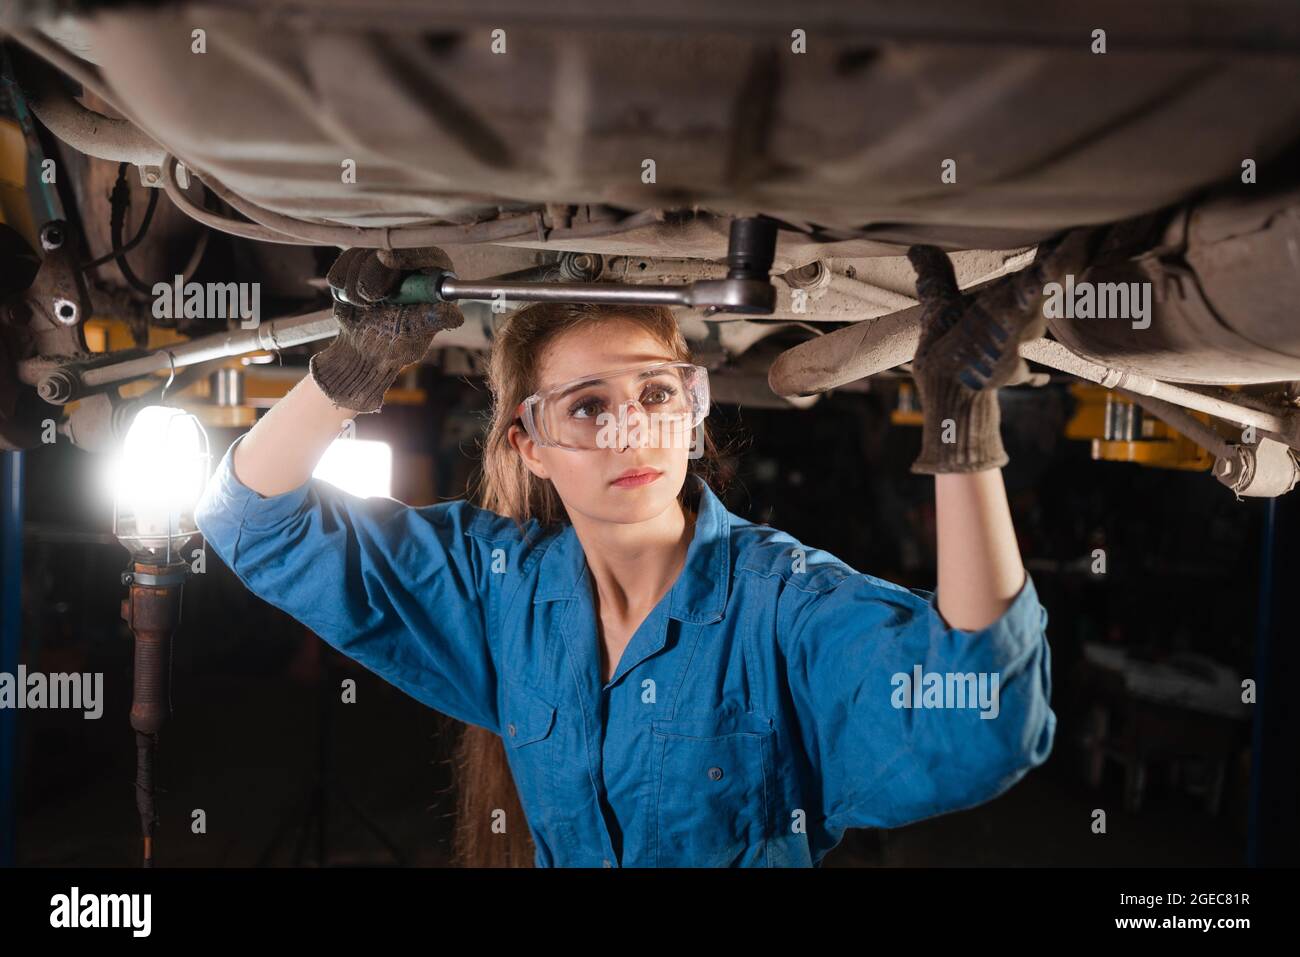 Young beautiful woman car mechanic is dressed in safety glasses and working overalls turns a nut for wrenches. Copy space. Stock Photo